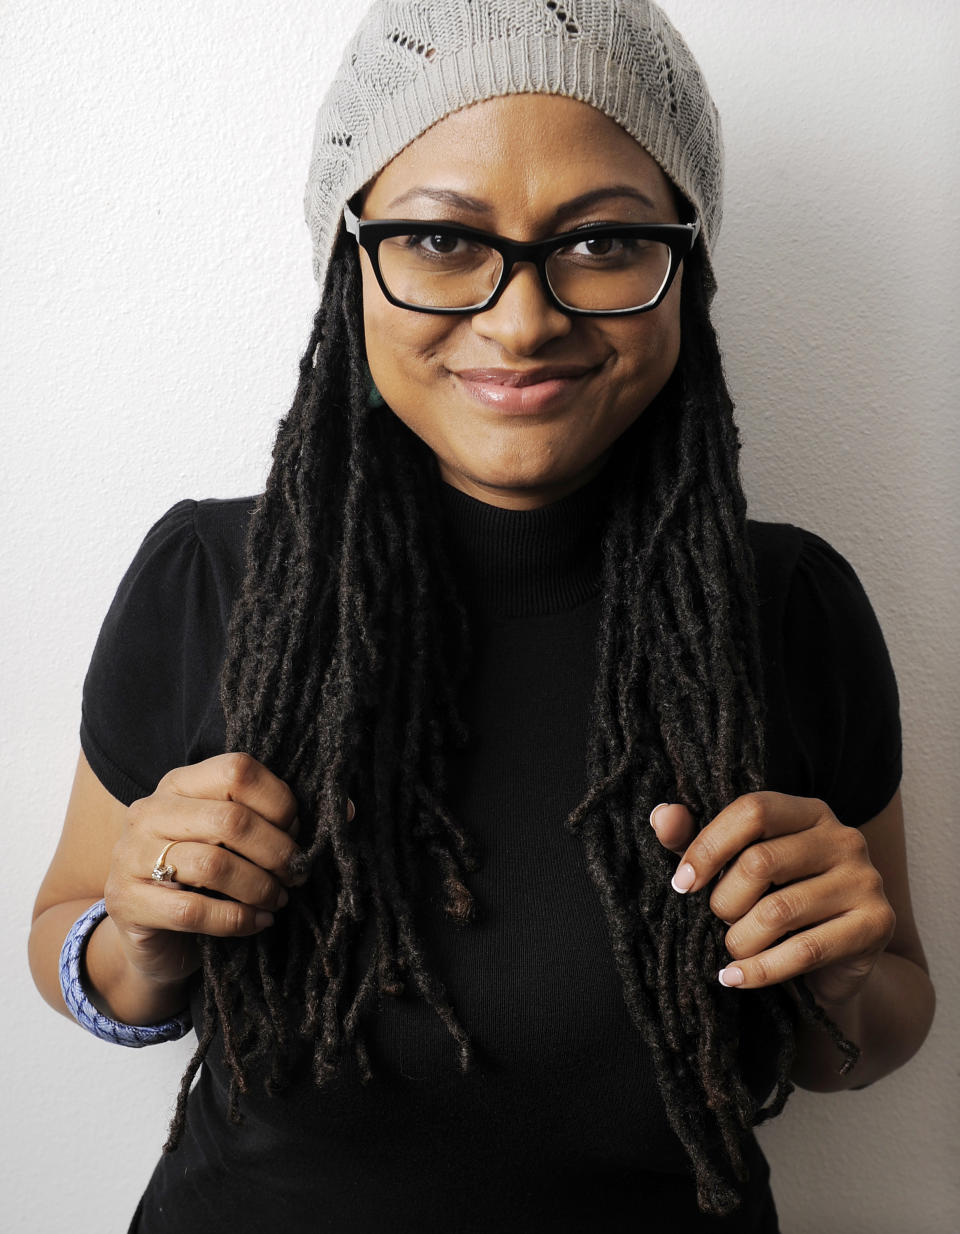 In this Wednesday, Oct. 17, 2012 photo, Ava DuVernay, writer/director of the film "Middle of Nowhere," poses for a portrait in Los Angeles. The rebirth of black independent film is taking place in a small office in the San Fernando Valley. This is where filmmaker DuVernay and her staff of two operate AaFFRM, the African-American Film Festival Releasing Movement, a boutique distribution company dedicated to discovering and promoting black directorial voices. (Photo by Chris Pizzello/Invision/AP)